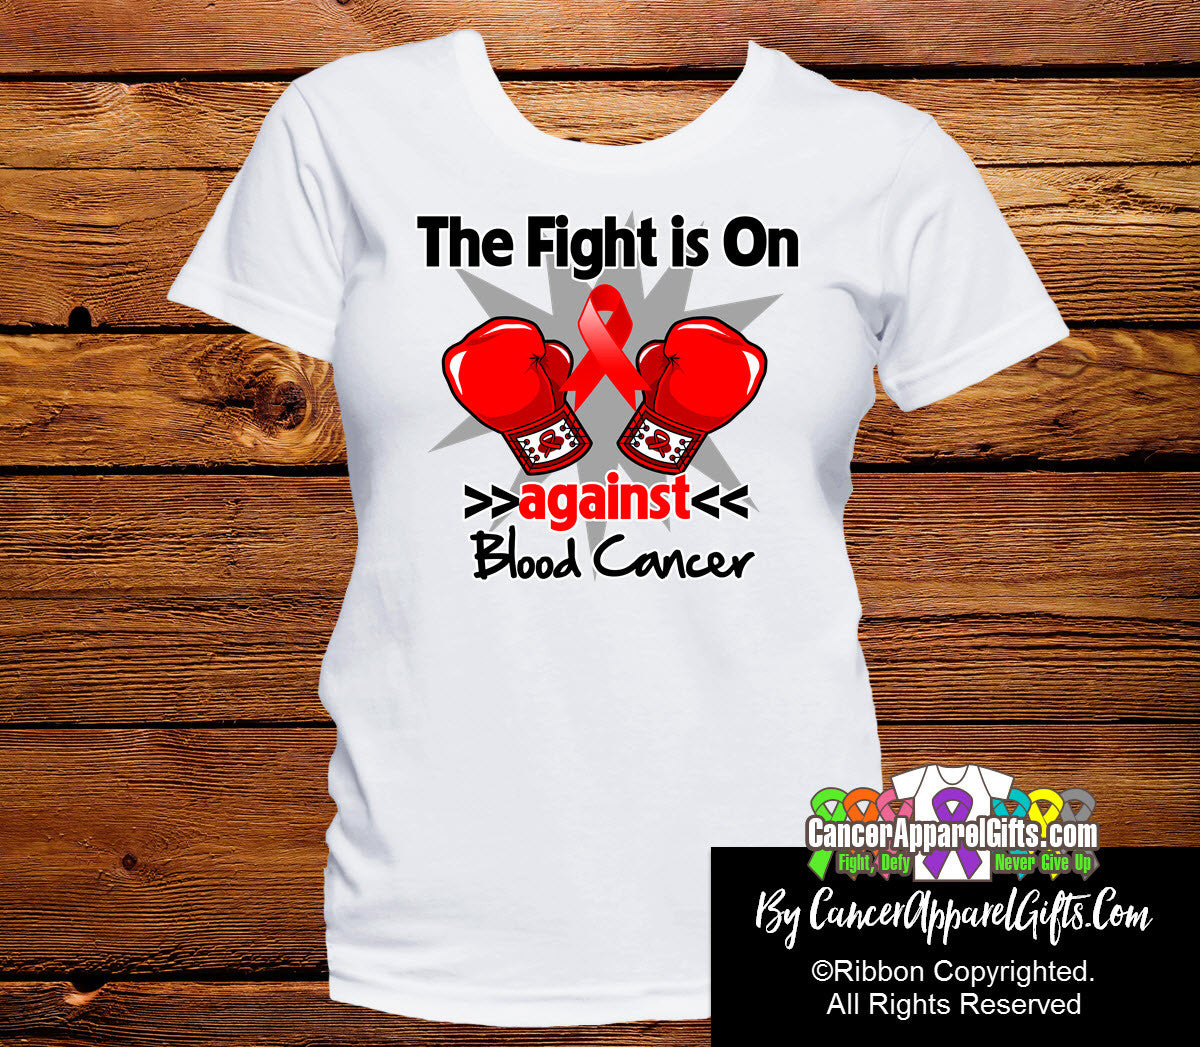 Blood Cancer The Fight is On Ladies Shirts